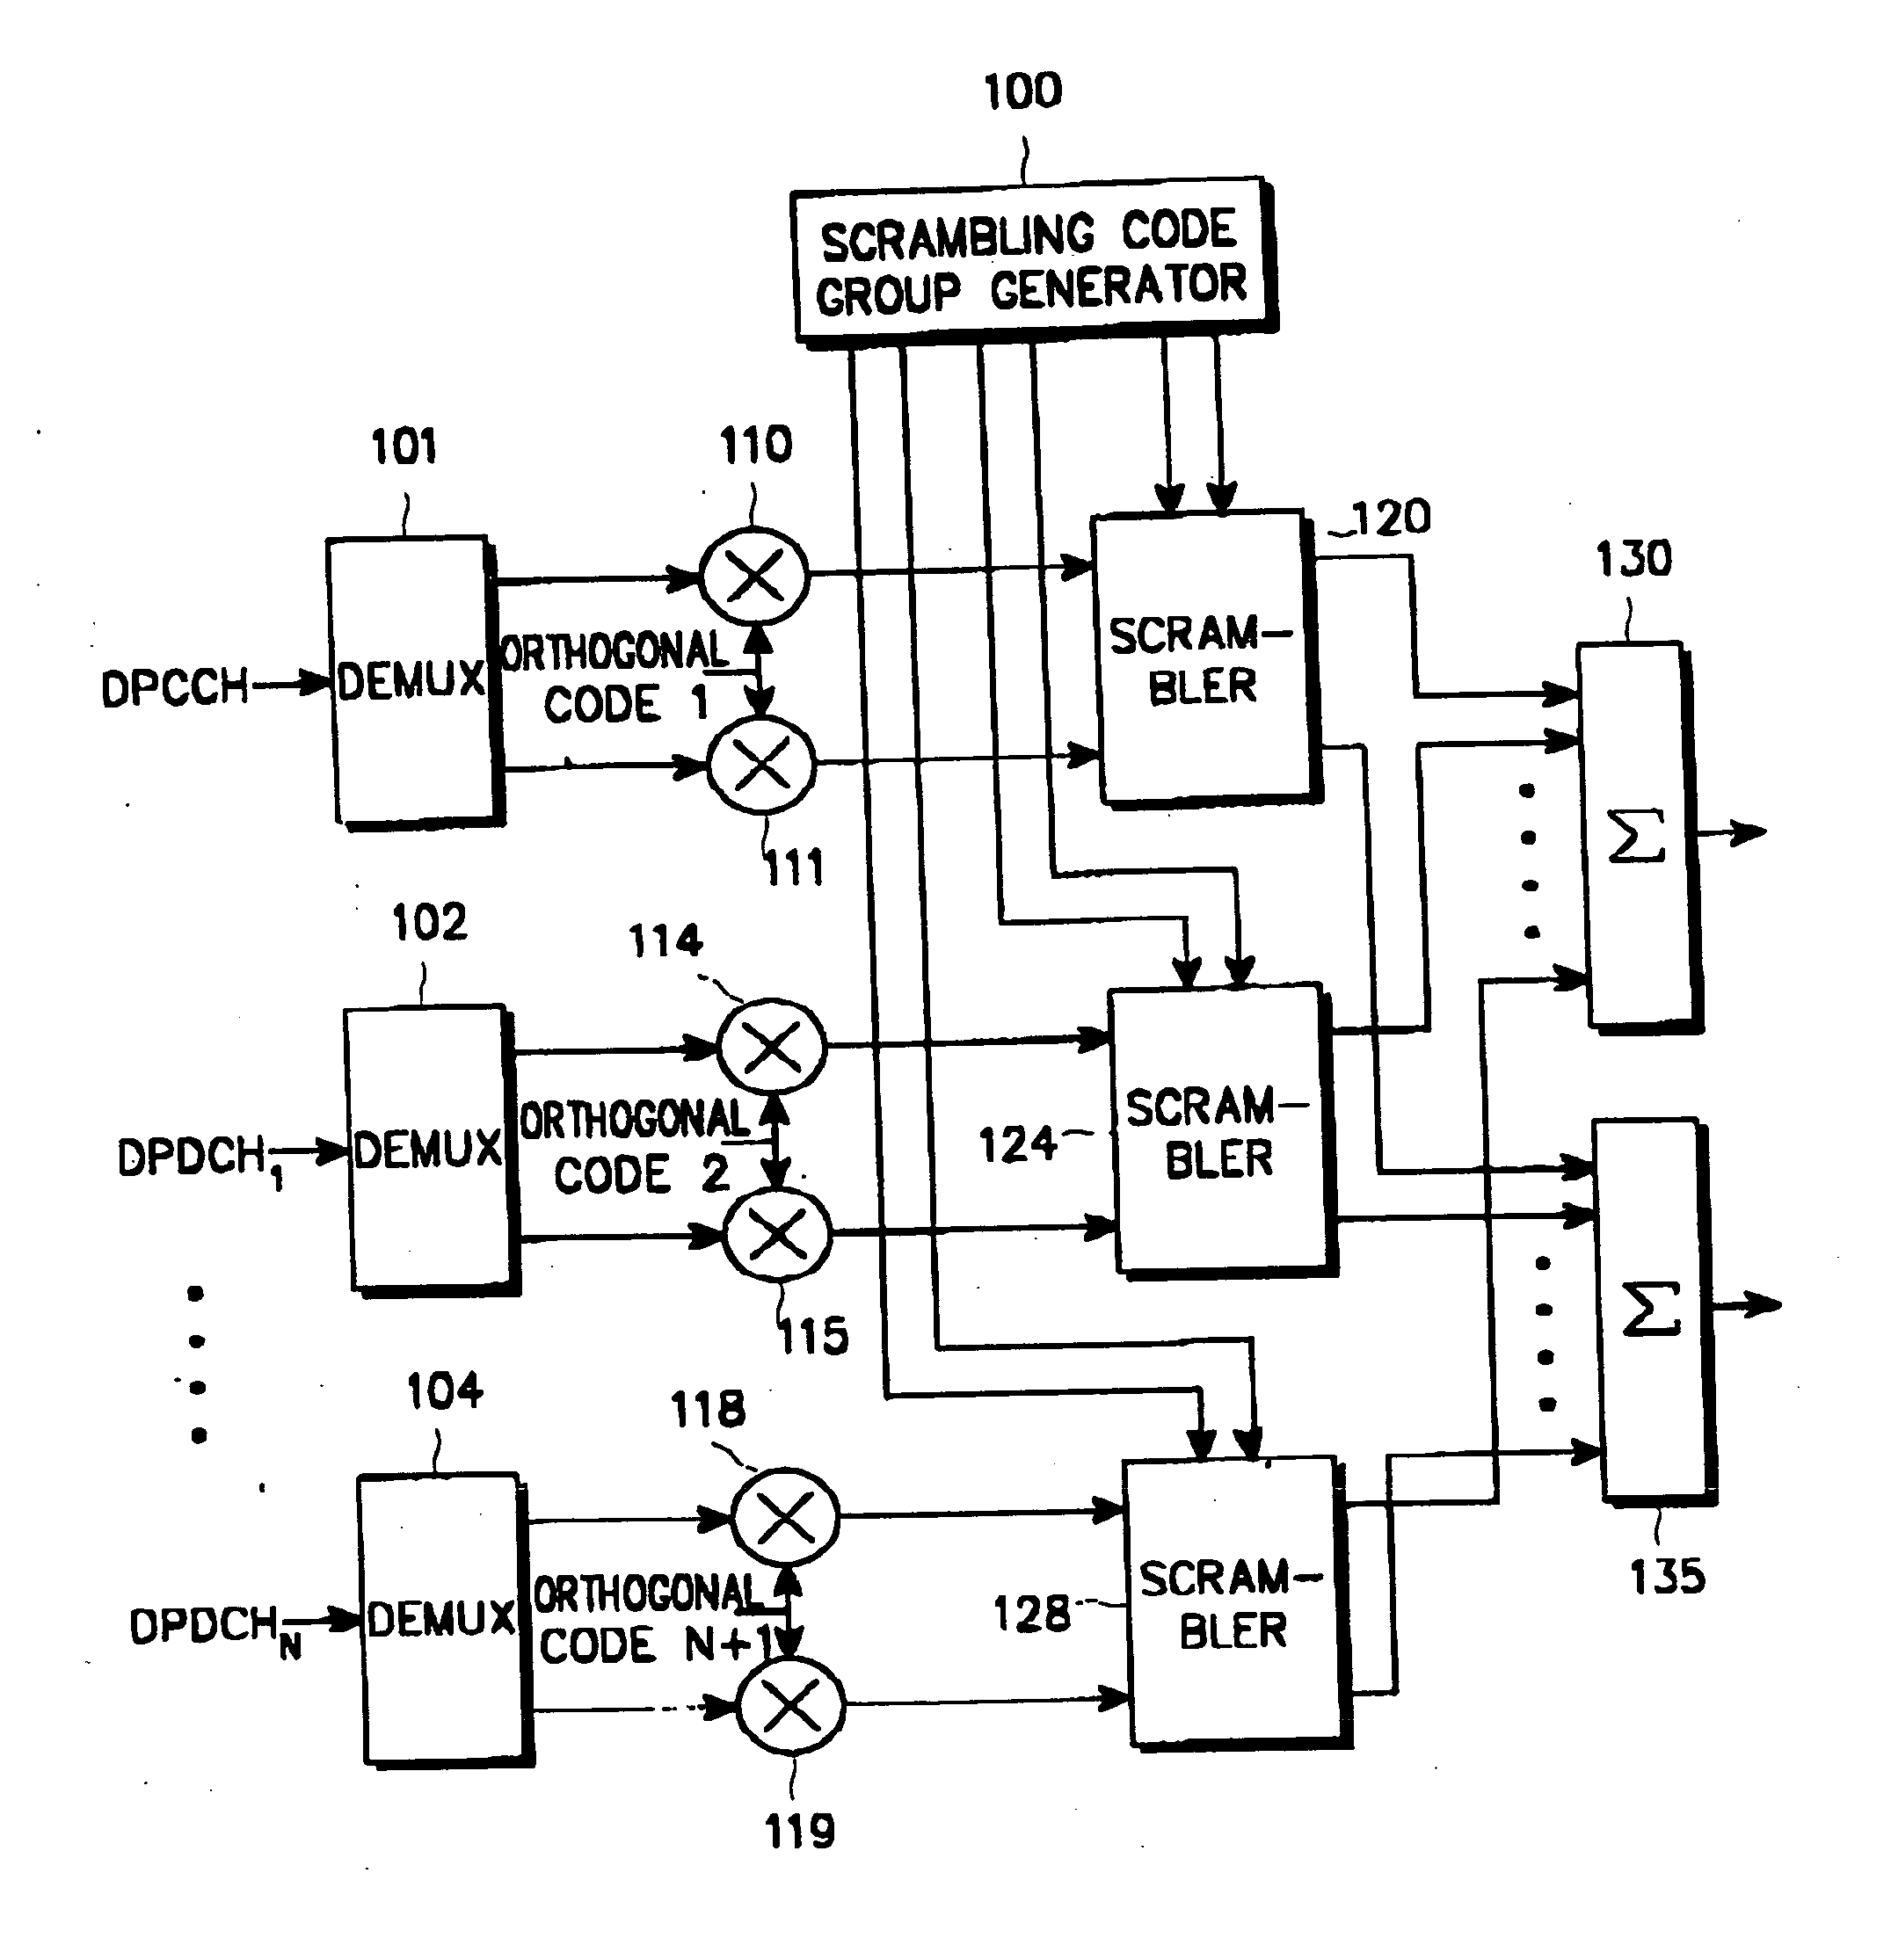 Apparatus and method for generating scrambling code in UMTS mobile communication system